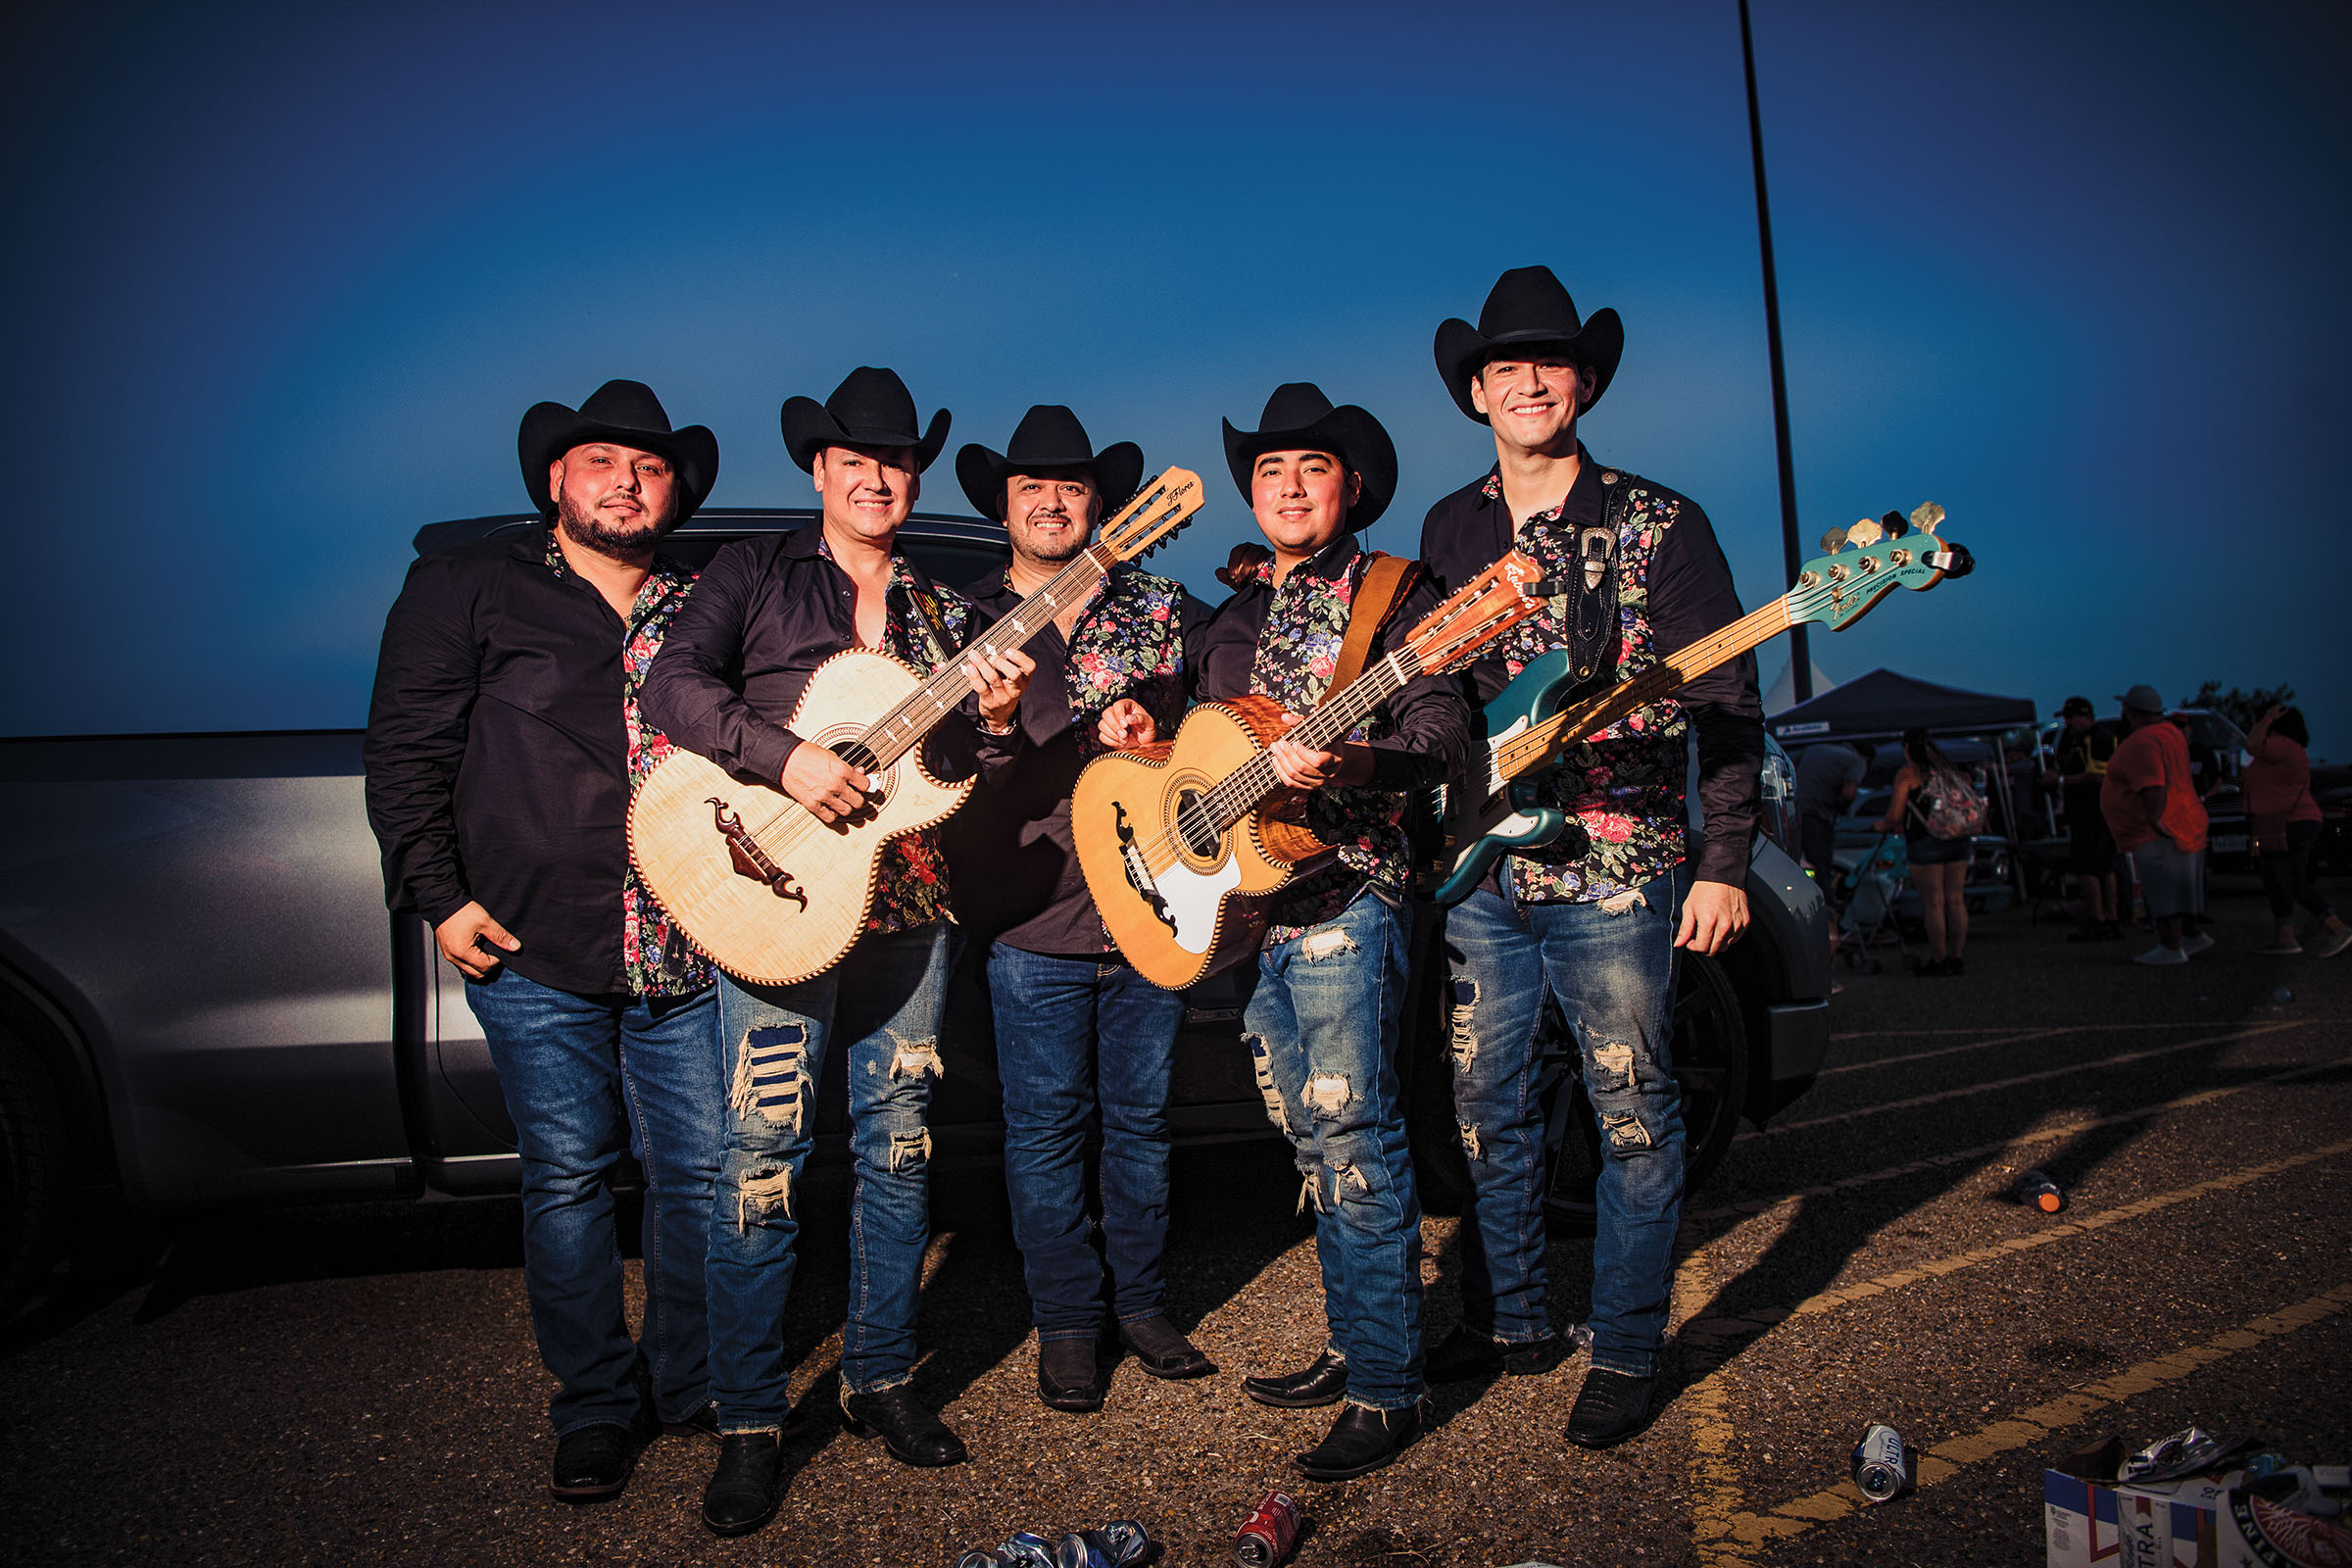 A group of men in jeans and black cowboy hats stand in front of a dark blue evening sky